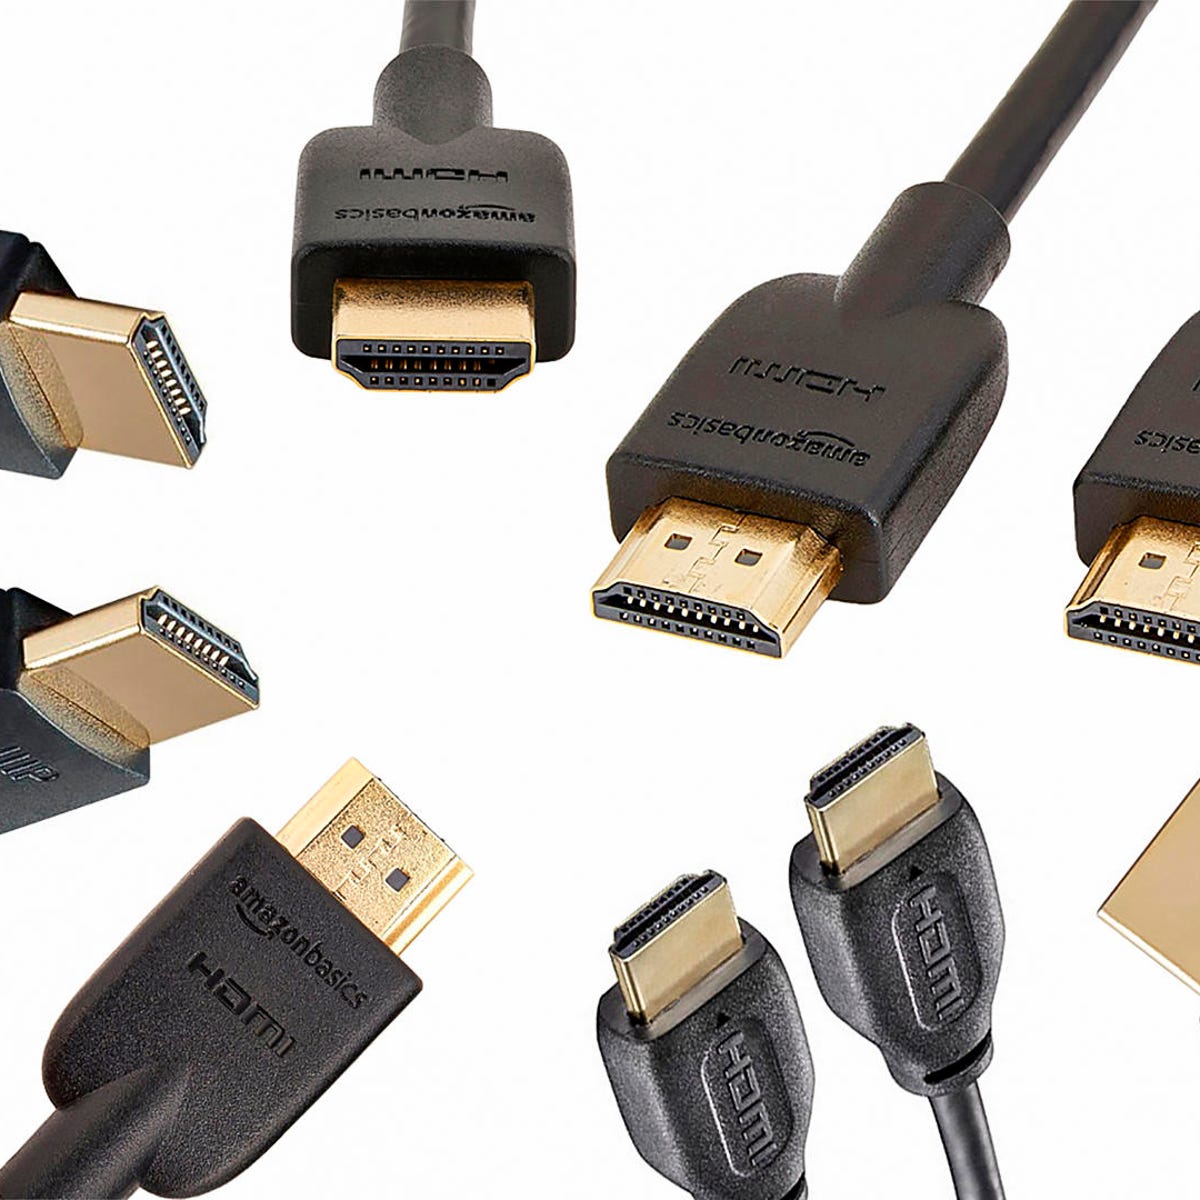 suffix klistermærke underskud The Best HDMI Cables for Your TV in 2023 - CNET